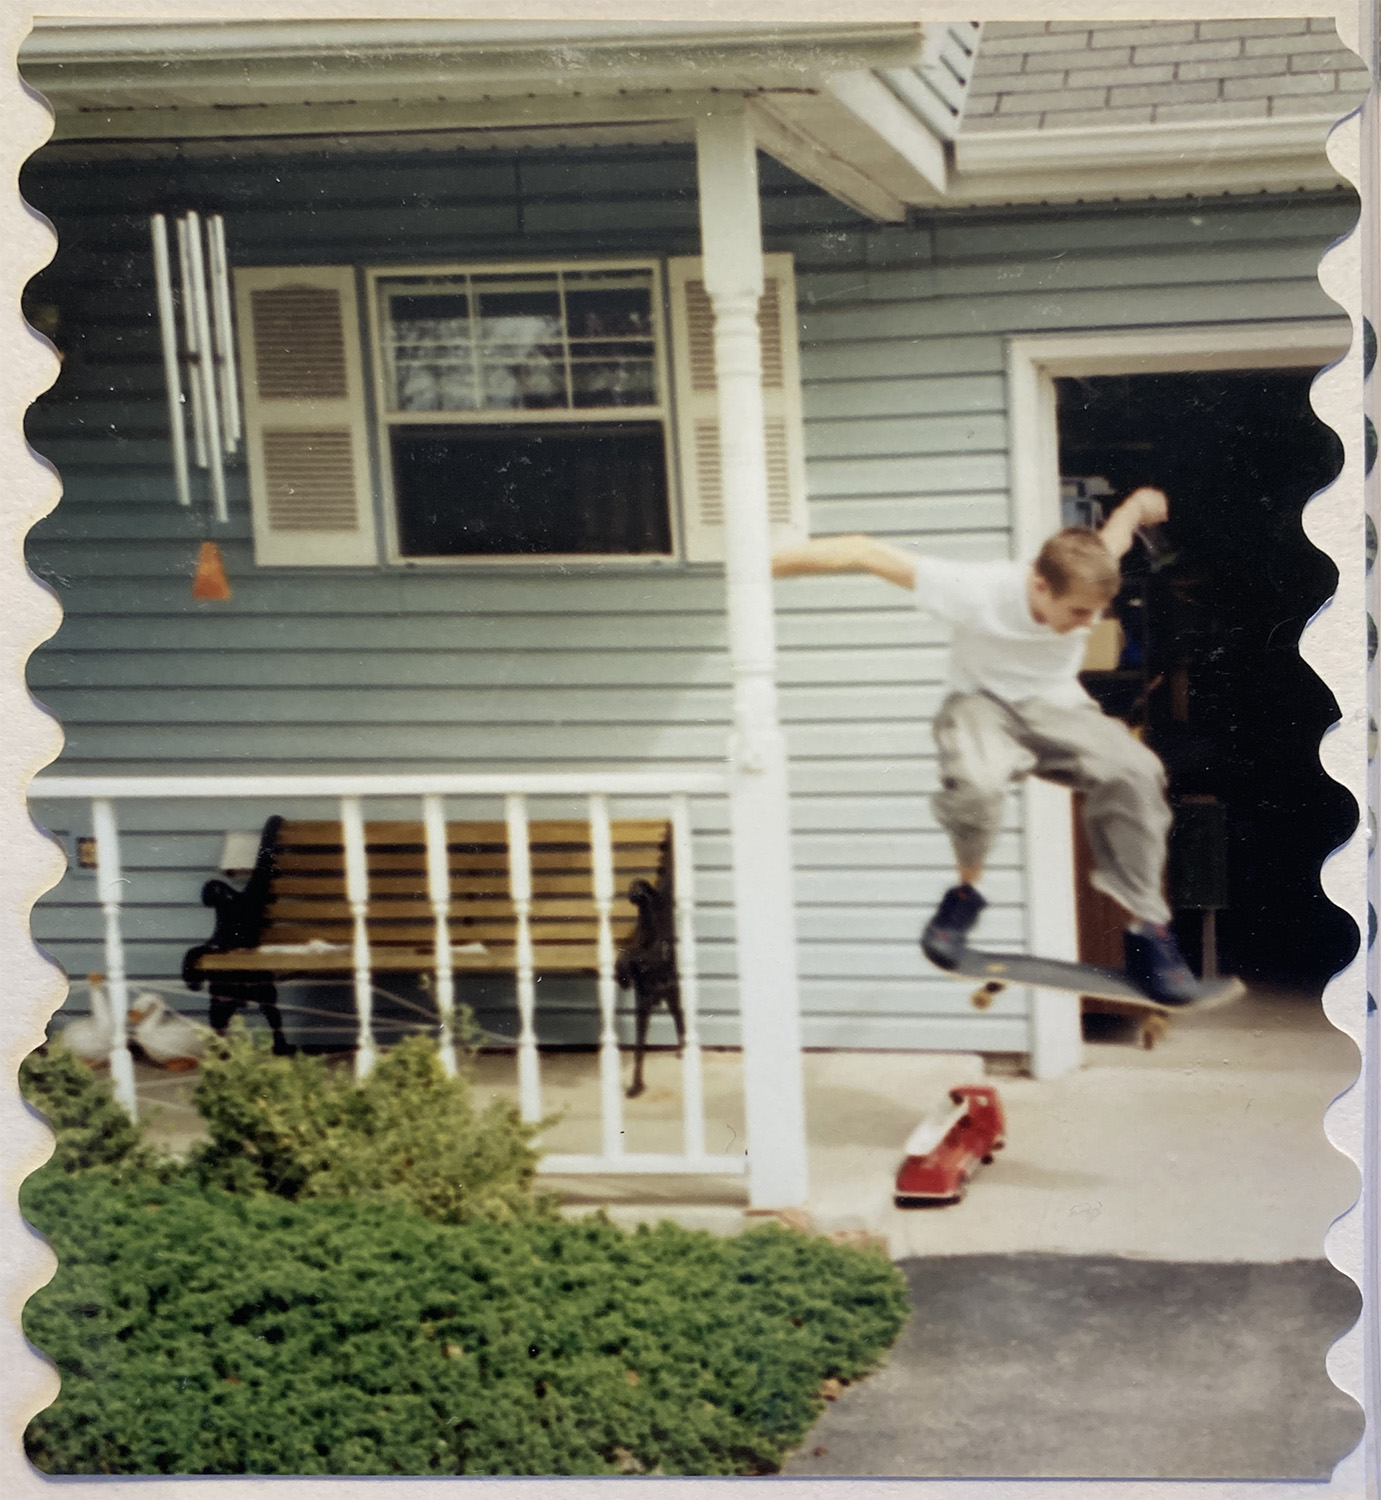 Getting some sweet air with an ollie over one of my childhood toys circa 1998 - Photo and scrapbooking edges courtesy my mom